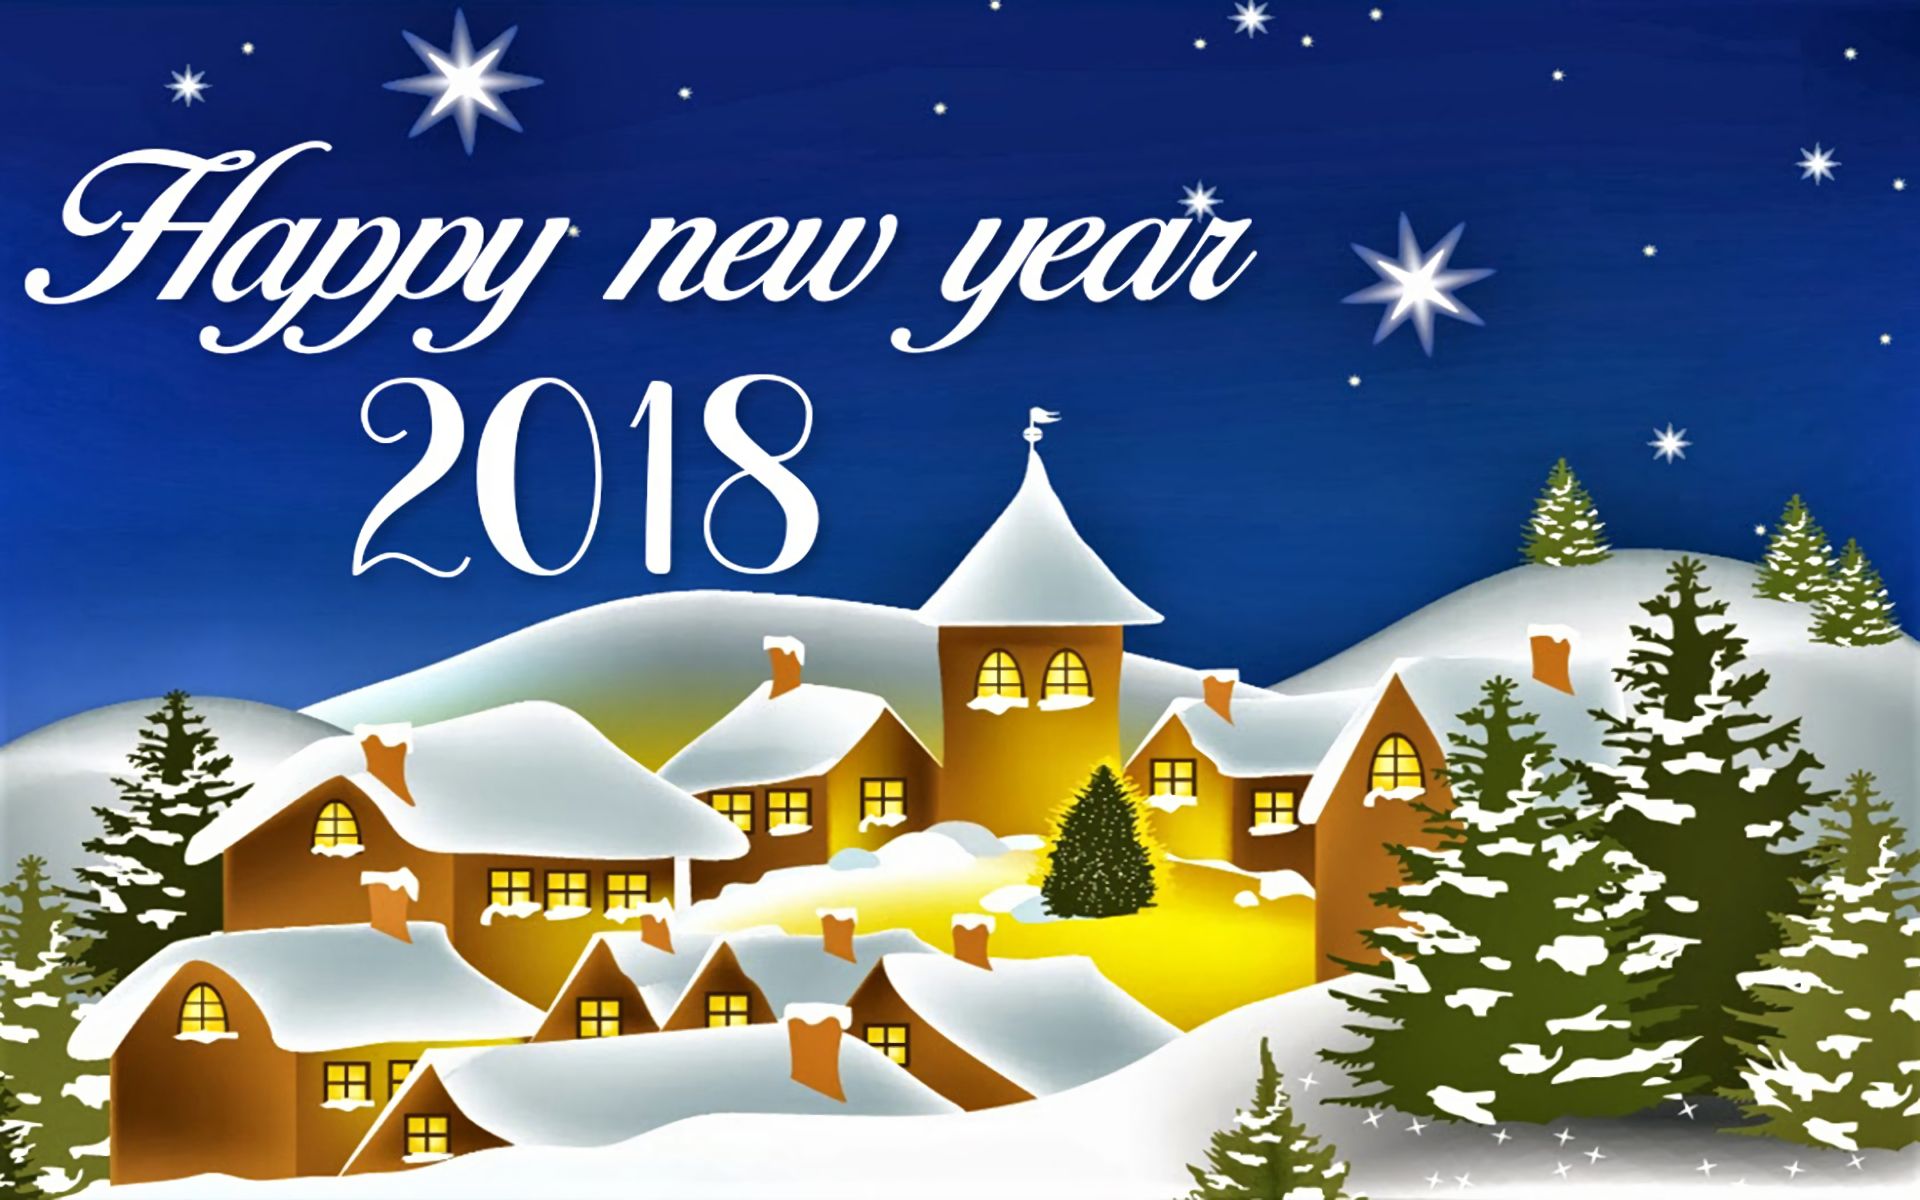 holiday, new year 2018, happy new year, new year, snow, village, winter